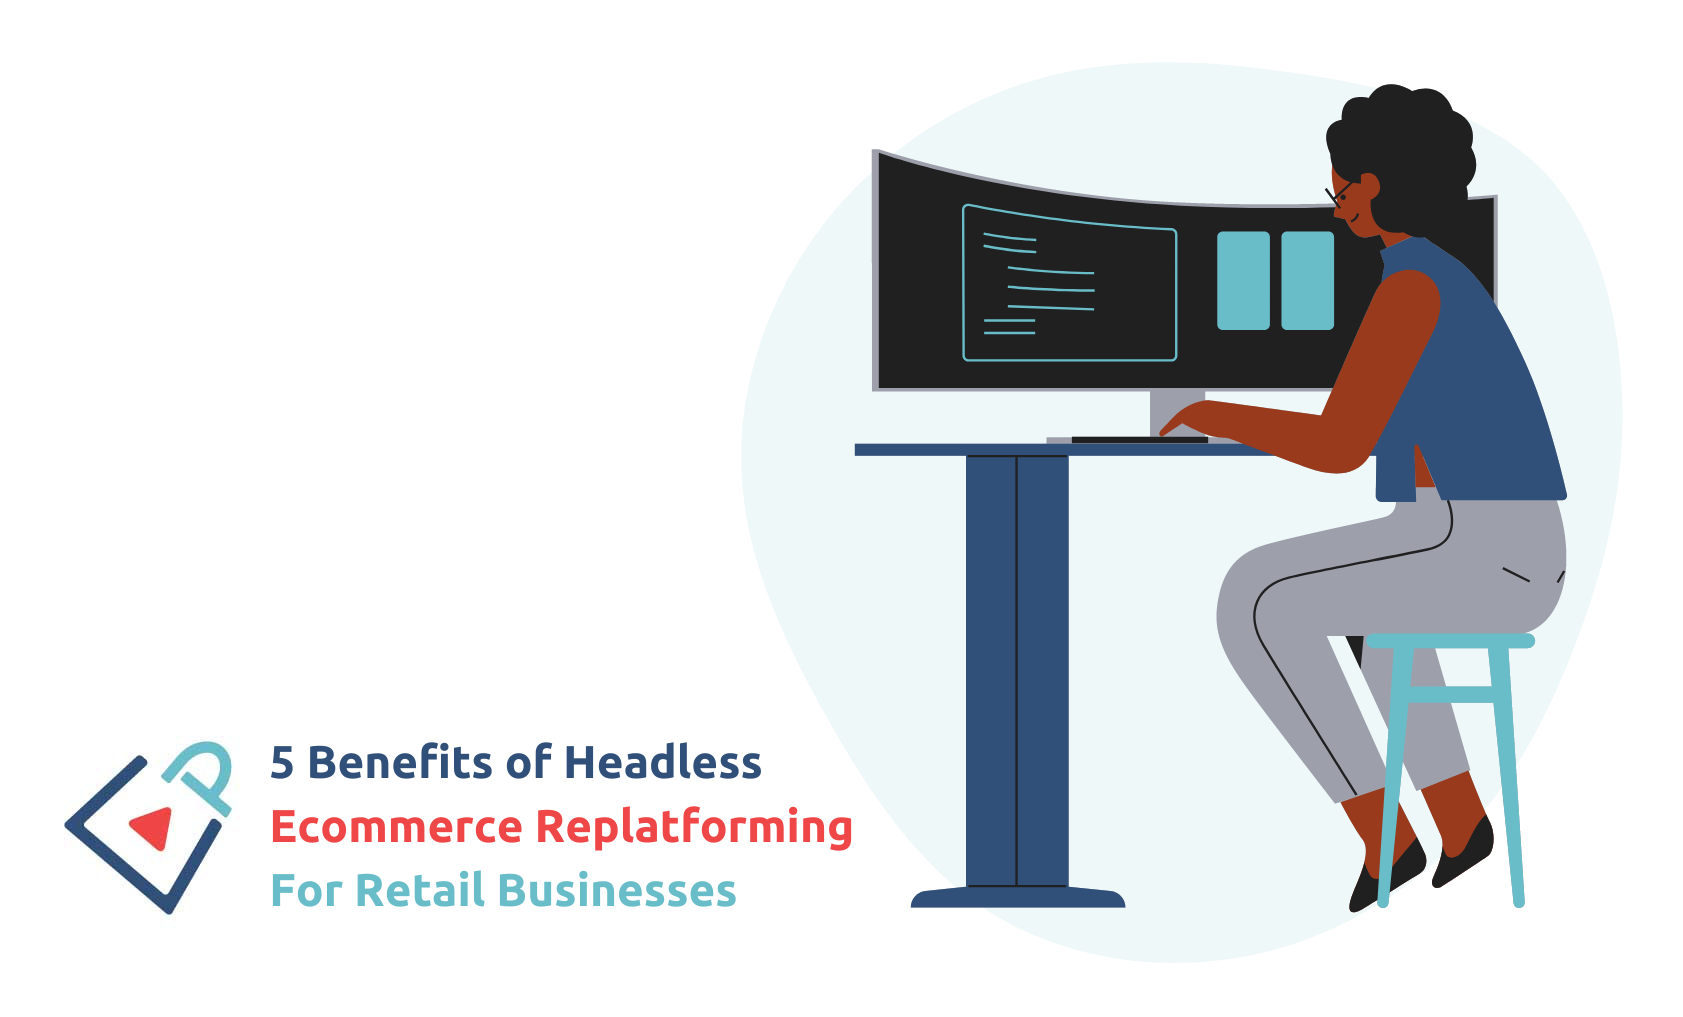 girl working on computer with text that says "5 benefits of headless ecommerce replatforming for retail businesses"